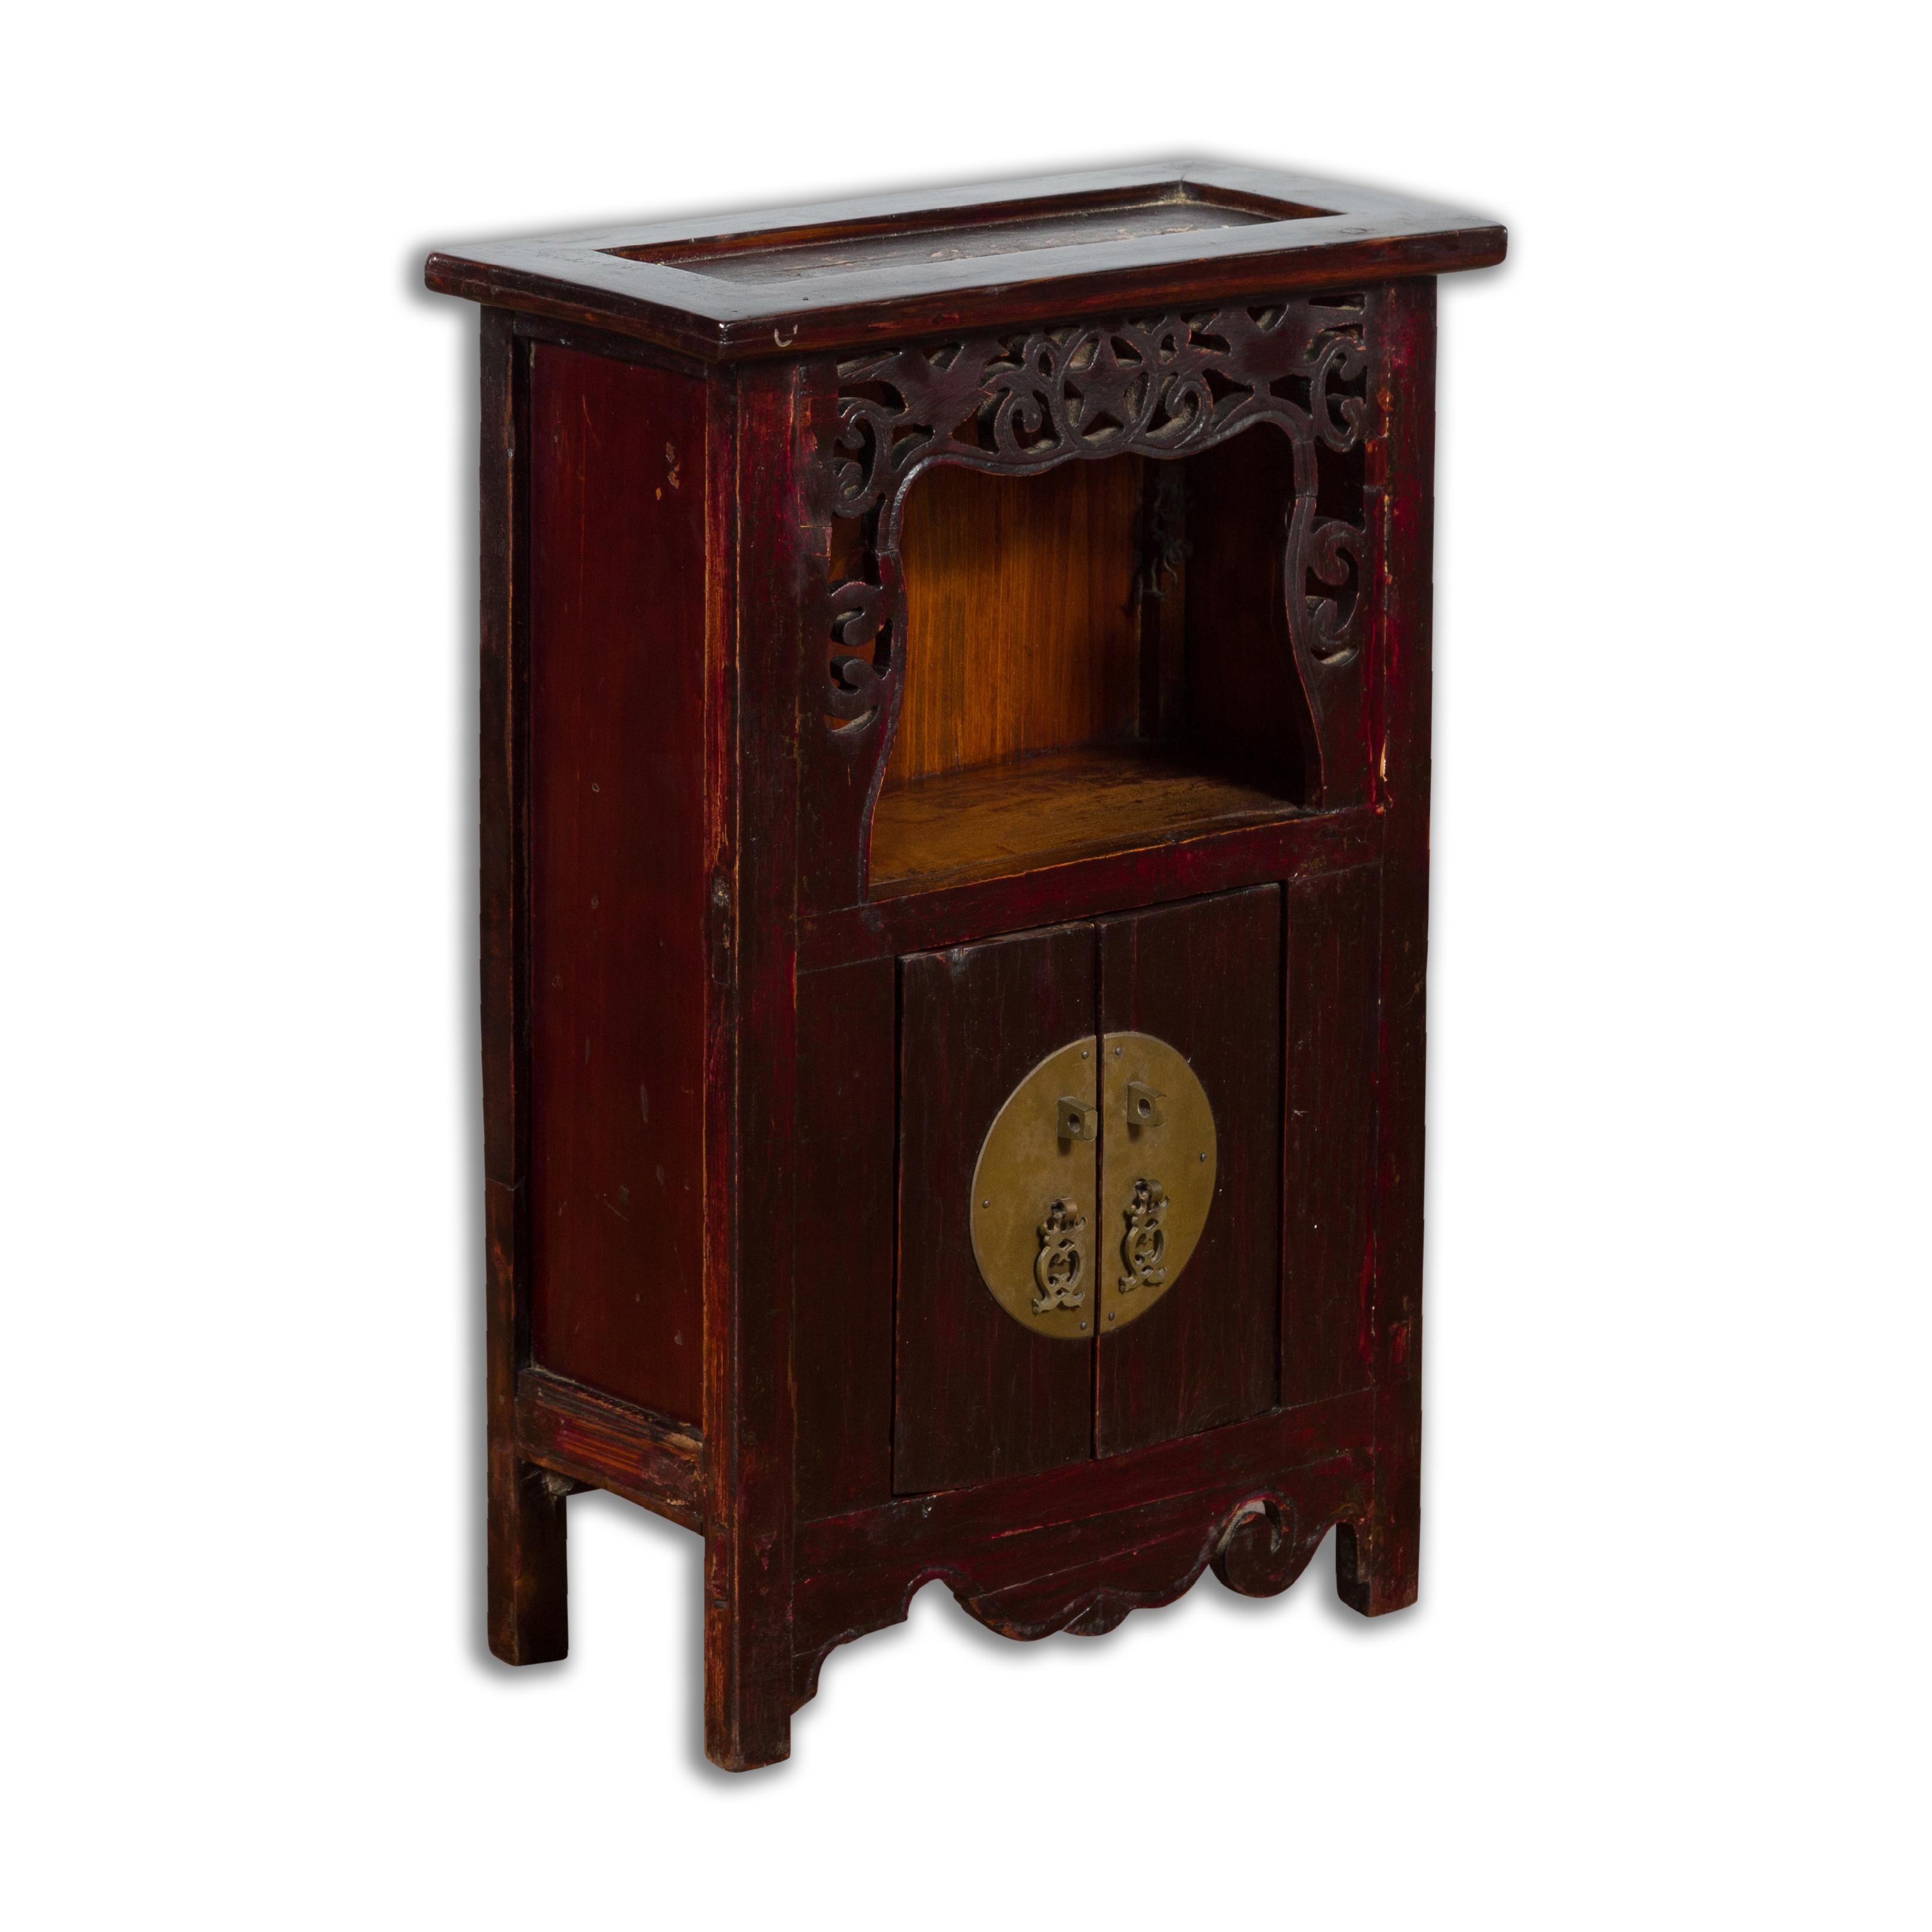 Chinese Qing Dynasty 19th Century Jewelry Cabinet with Star-Carved Shelf For Sale 9